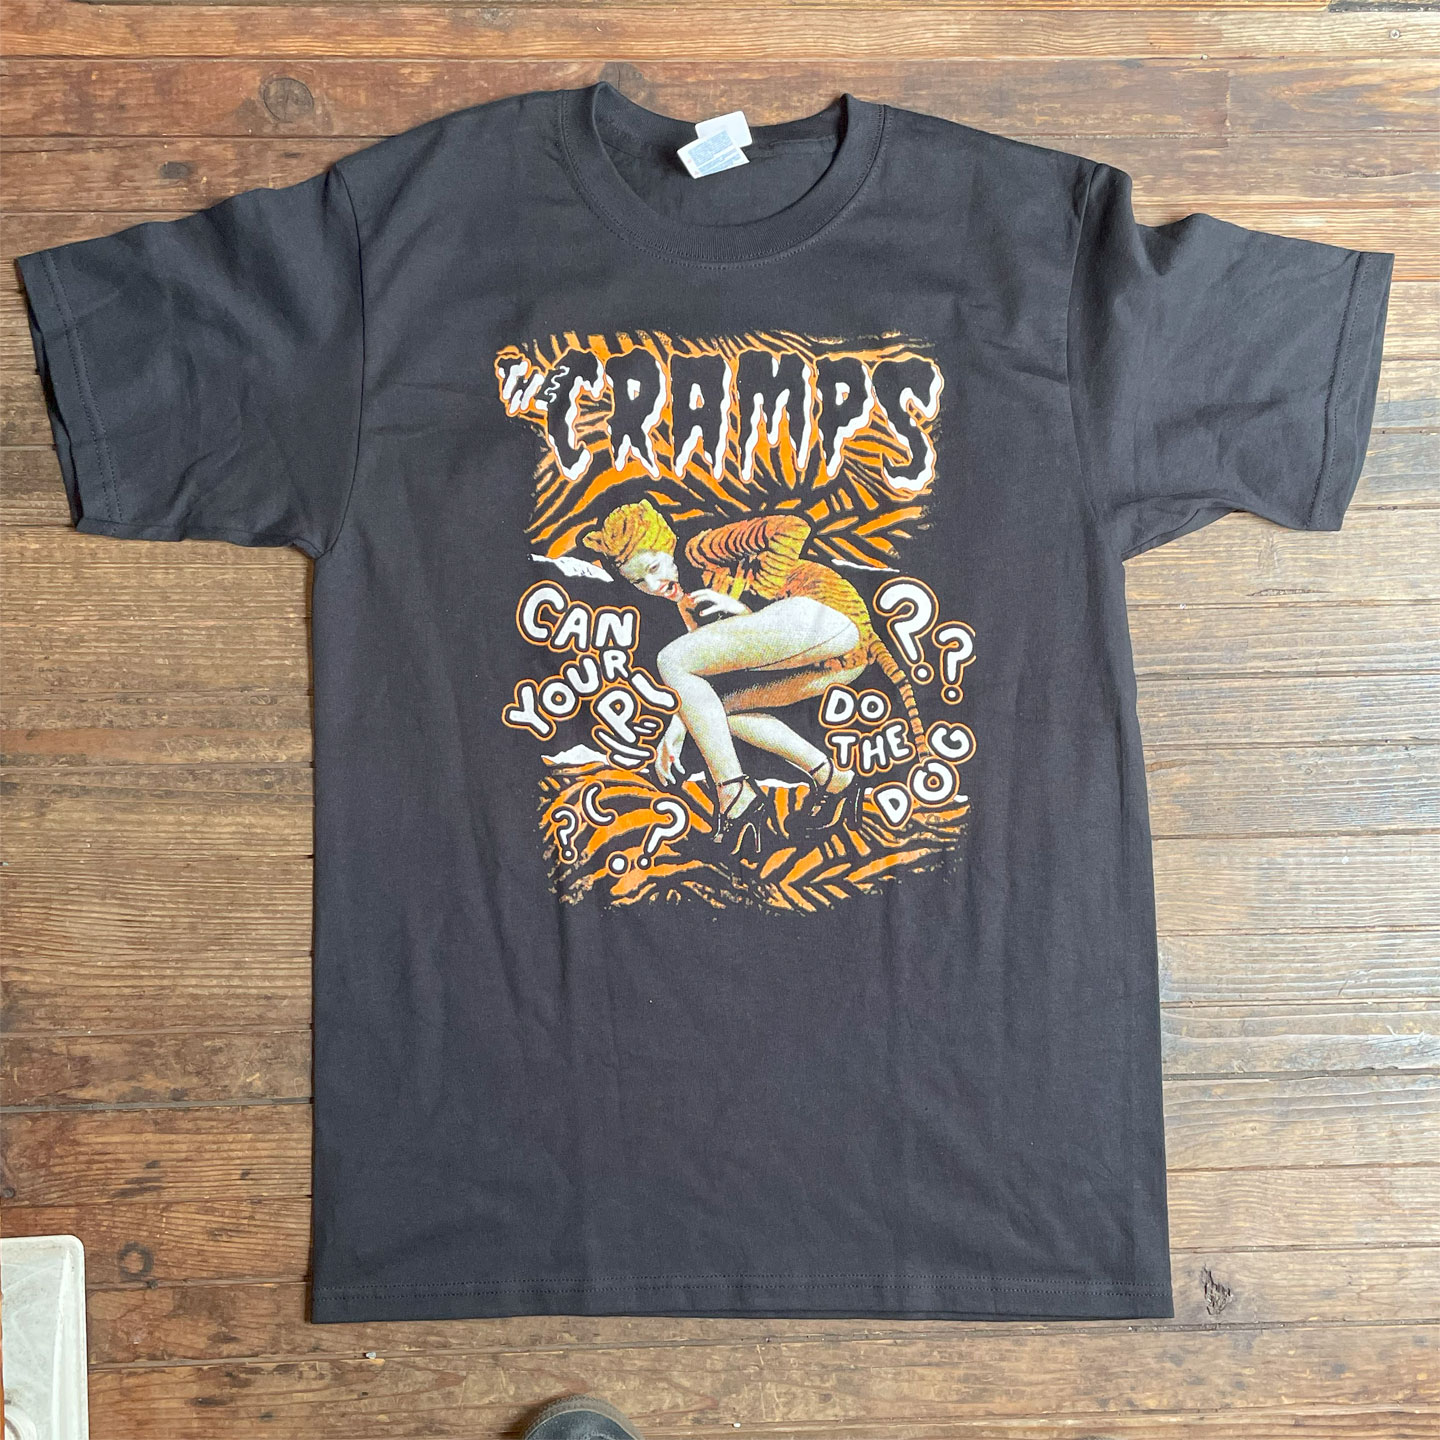 CRAMPS Tシャツ can your pussy do the dog